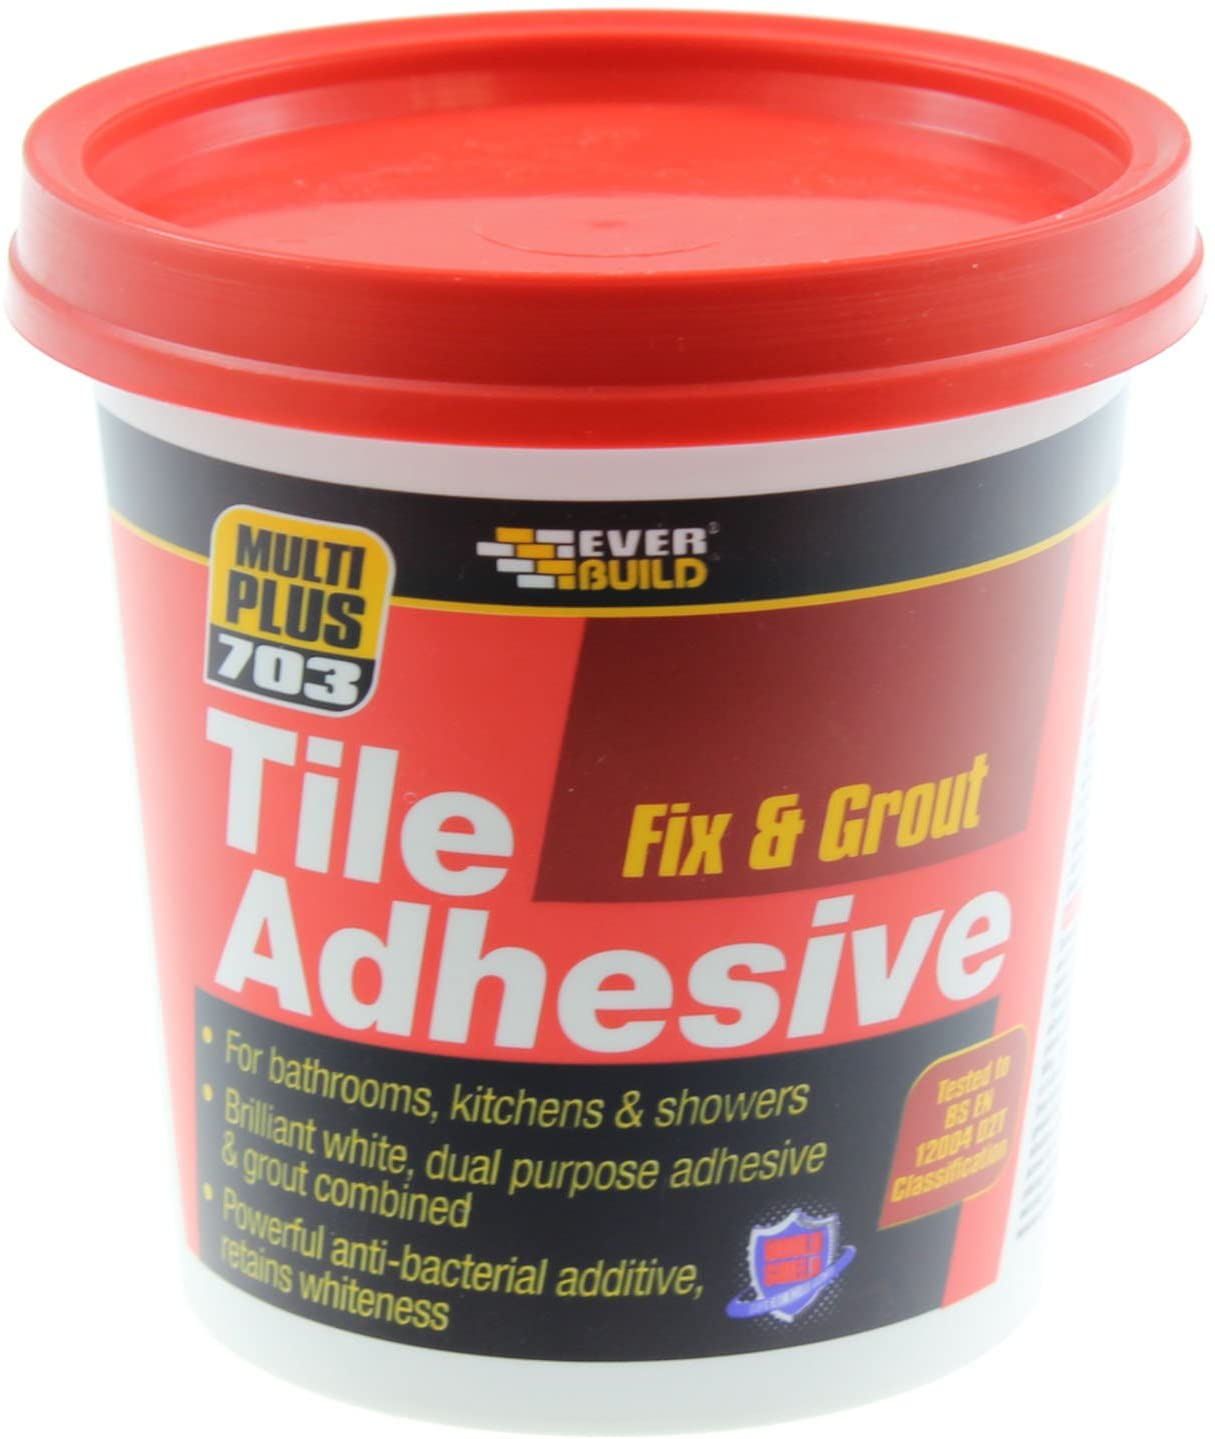 EVER BUILD FIX & GROUT TILE ADHESIVE 500ML